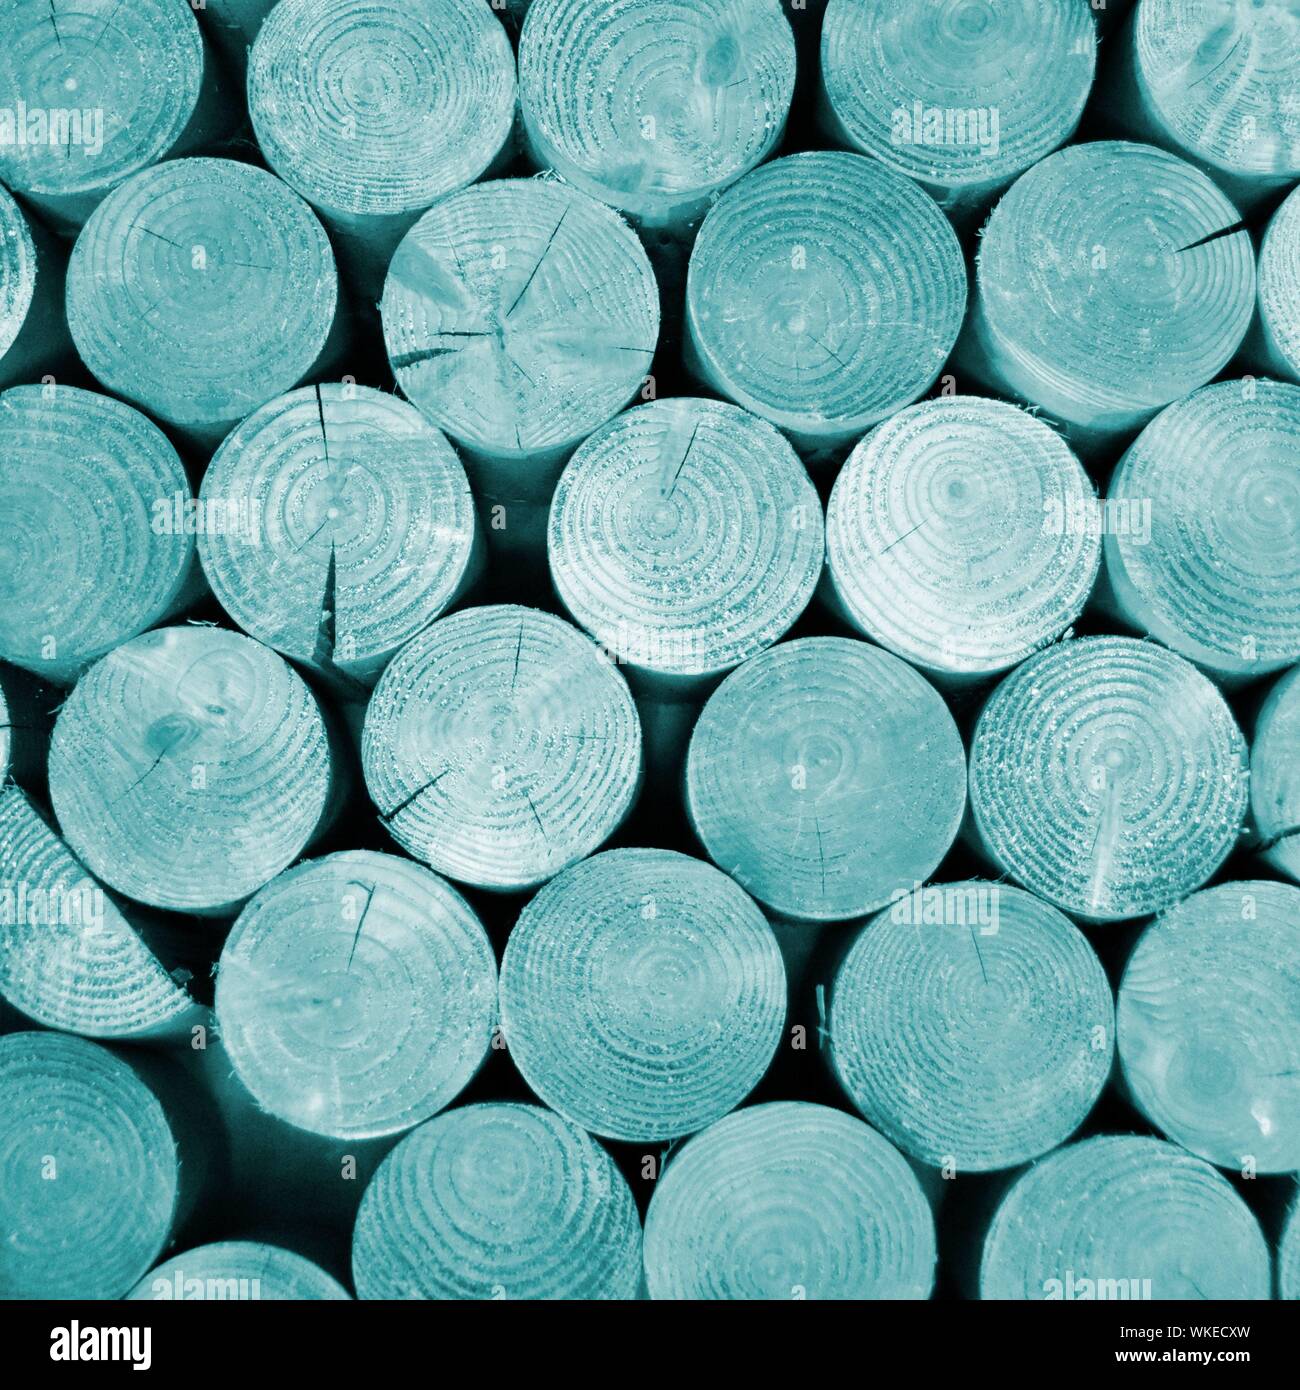 Manipulated colour applied to ends of stacked sawn tree timber logs to create abstract background pattern image of round shapes and circles England UK Stock Photo